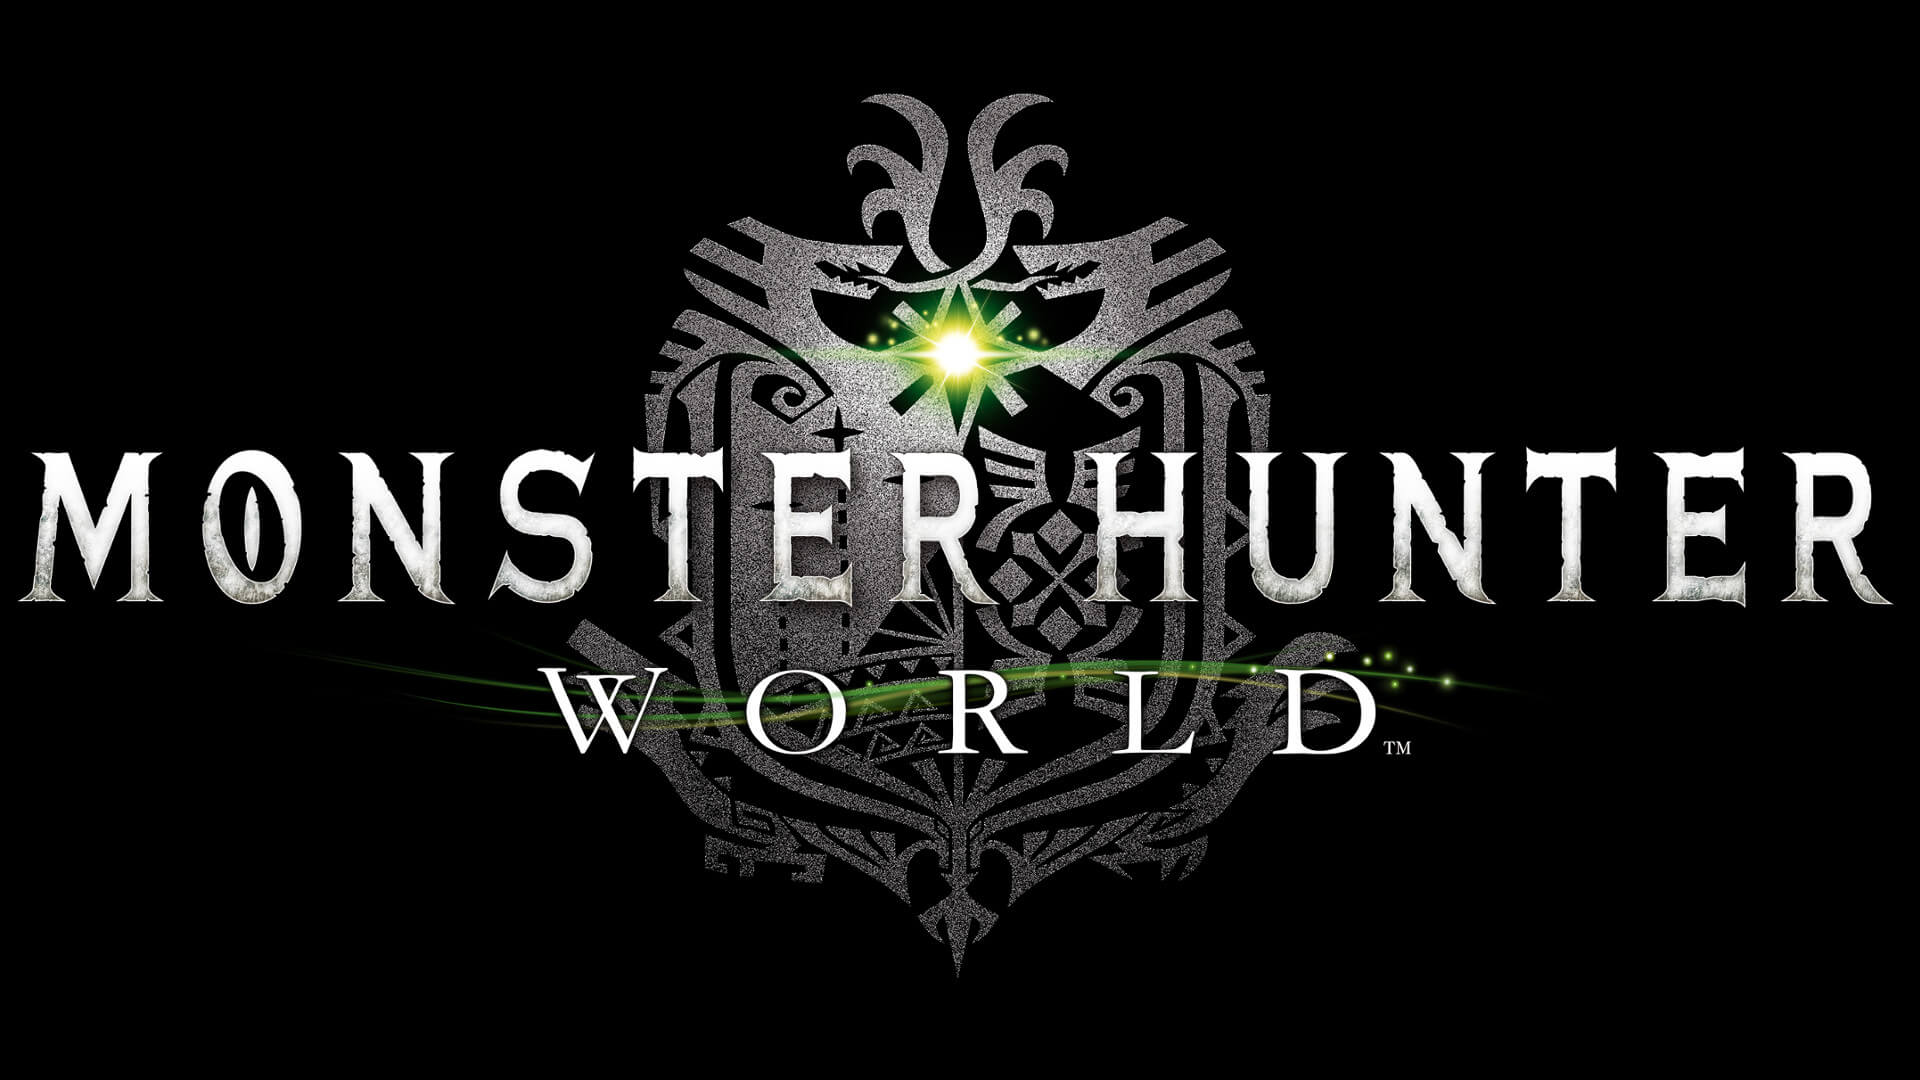 Sony Paid To Delay Monster Hunter World's PC Version And Block Crossplay,  Per New Leak – Rumor